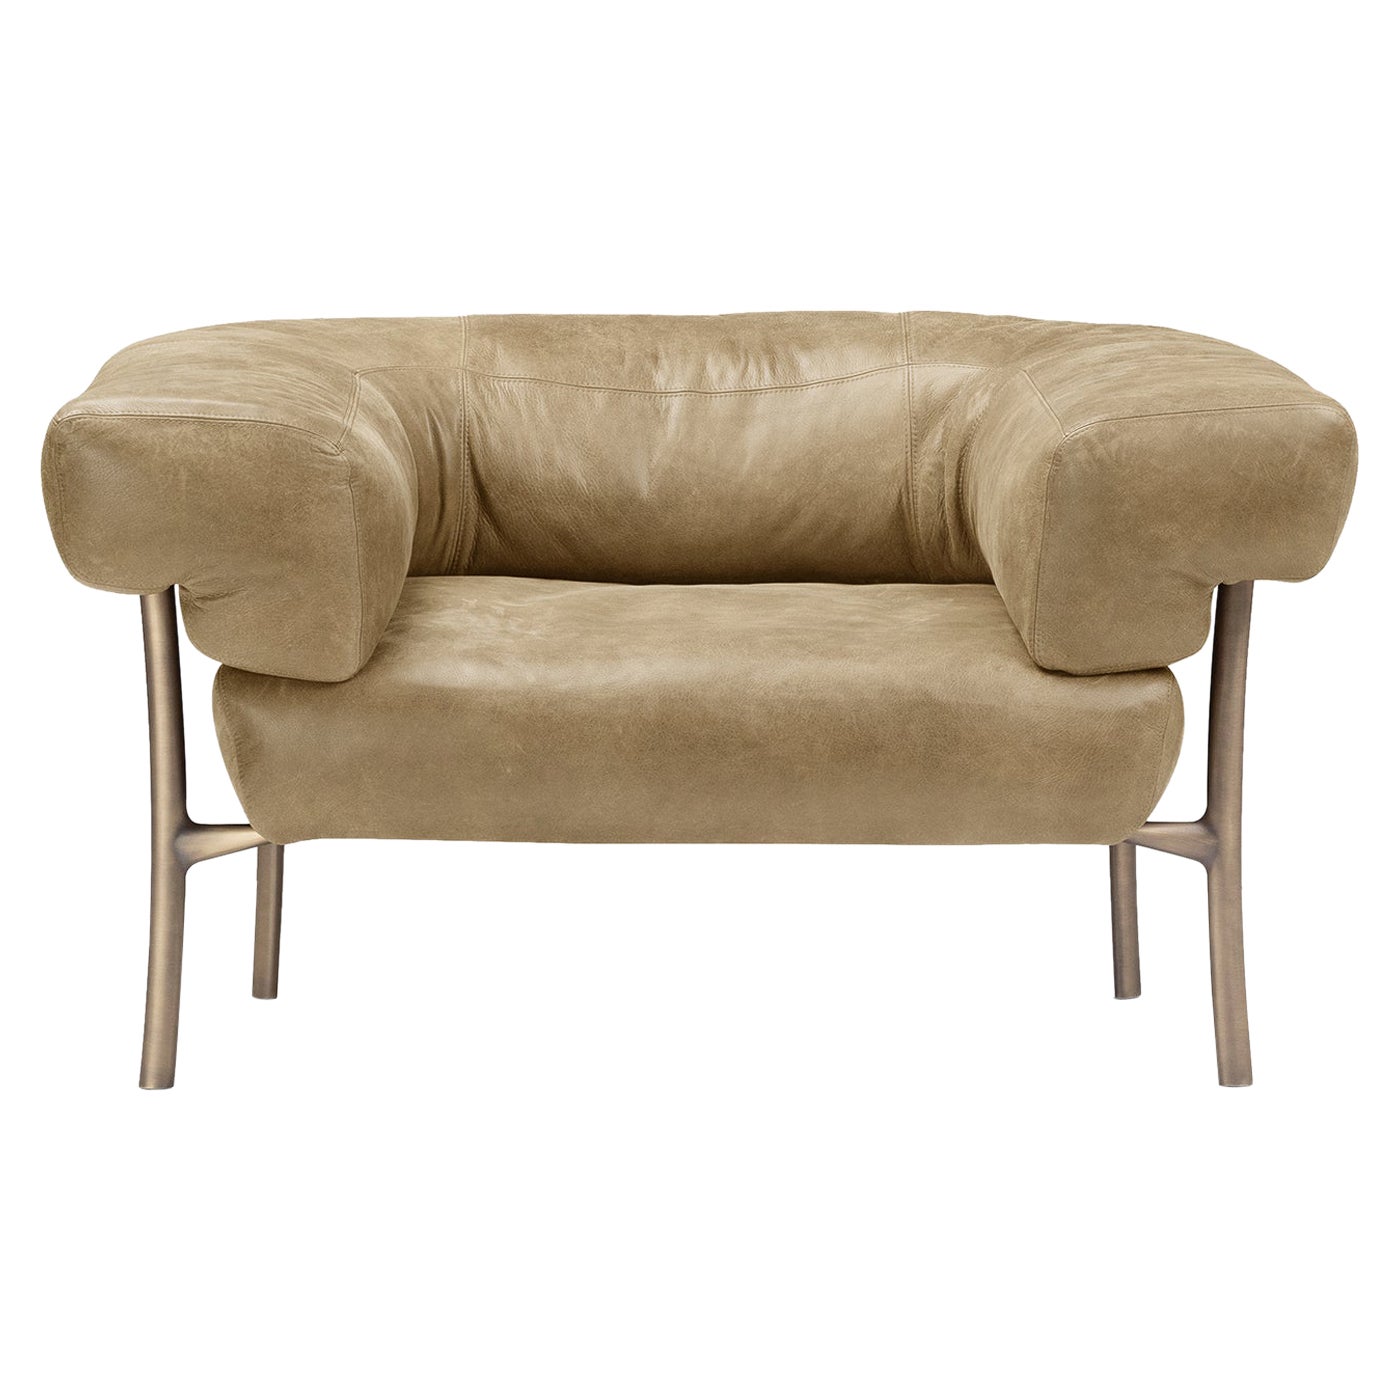 Katana Beige Leather Armchair by Paolo Rizzatto